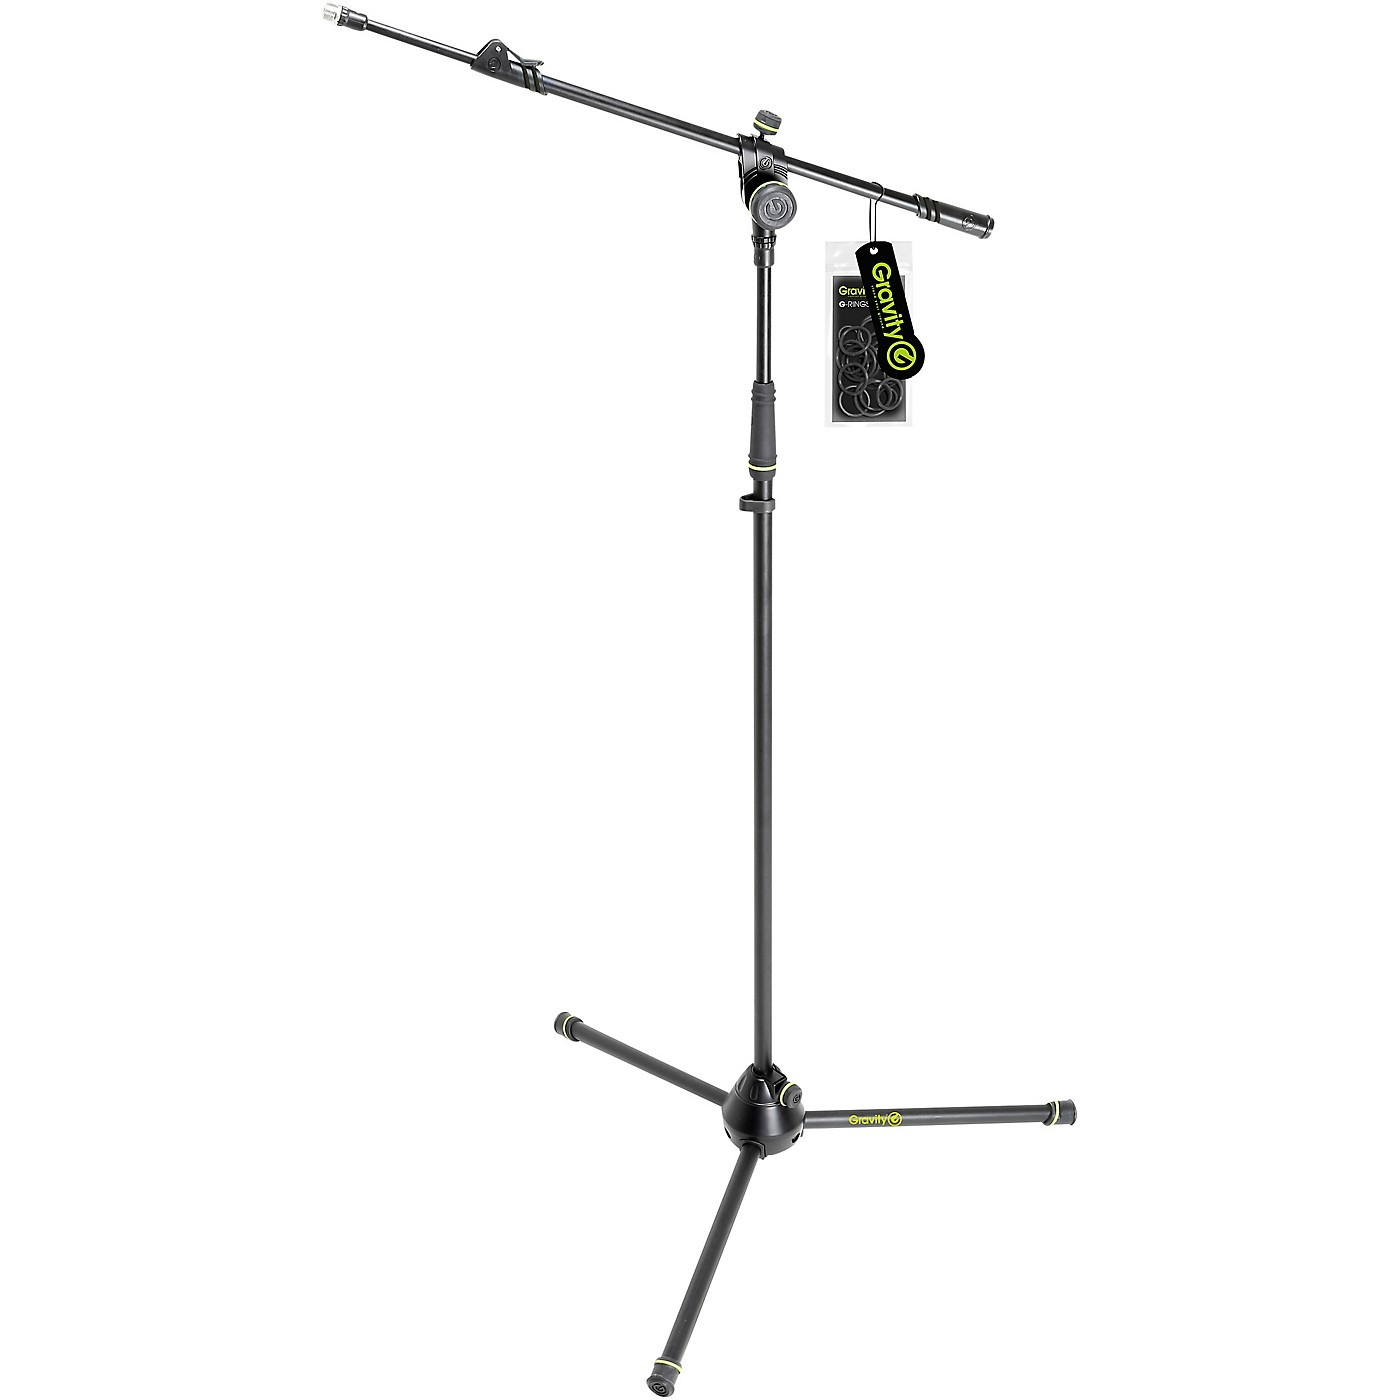 Gravity Stands Microphone Stand With Folding Tripod Base And 2-Point Adjustment Telescoping Boom - Heavy Duty thumbnail